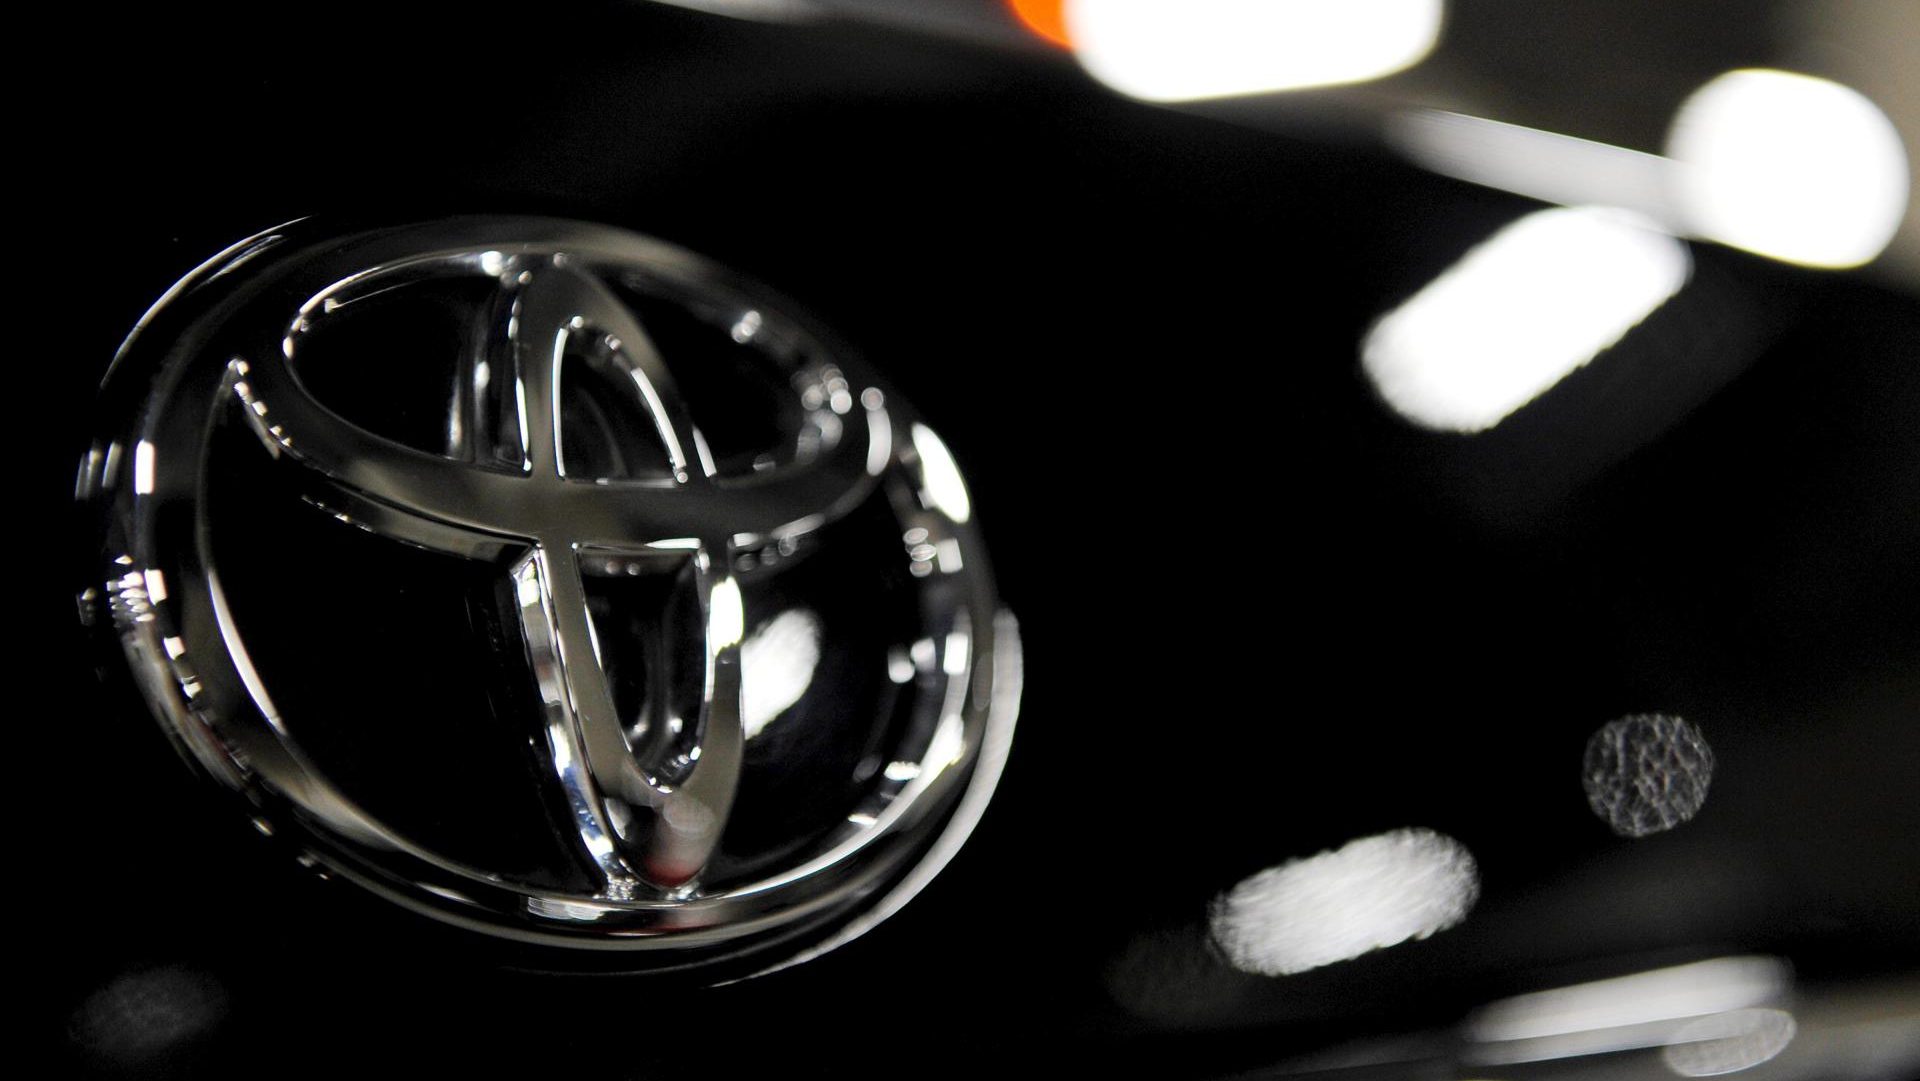 The Toyota logo on one of its vehicles in Tokyo, Japan, August 4, 2010. EFE-EPA FILE/FRANCK ROBICHON